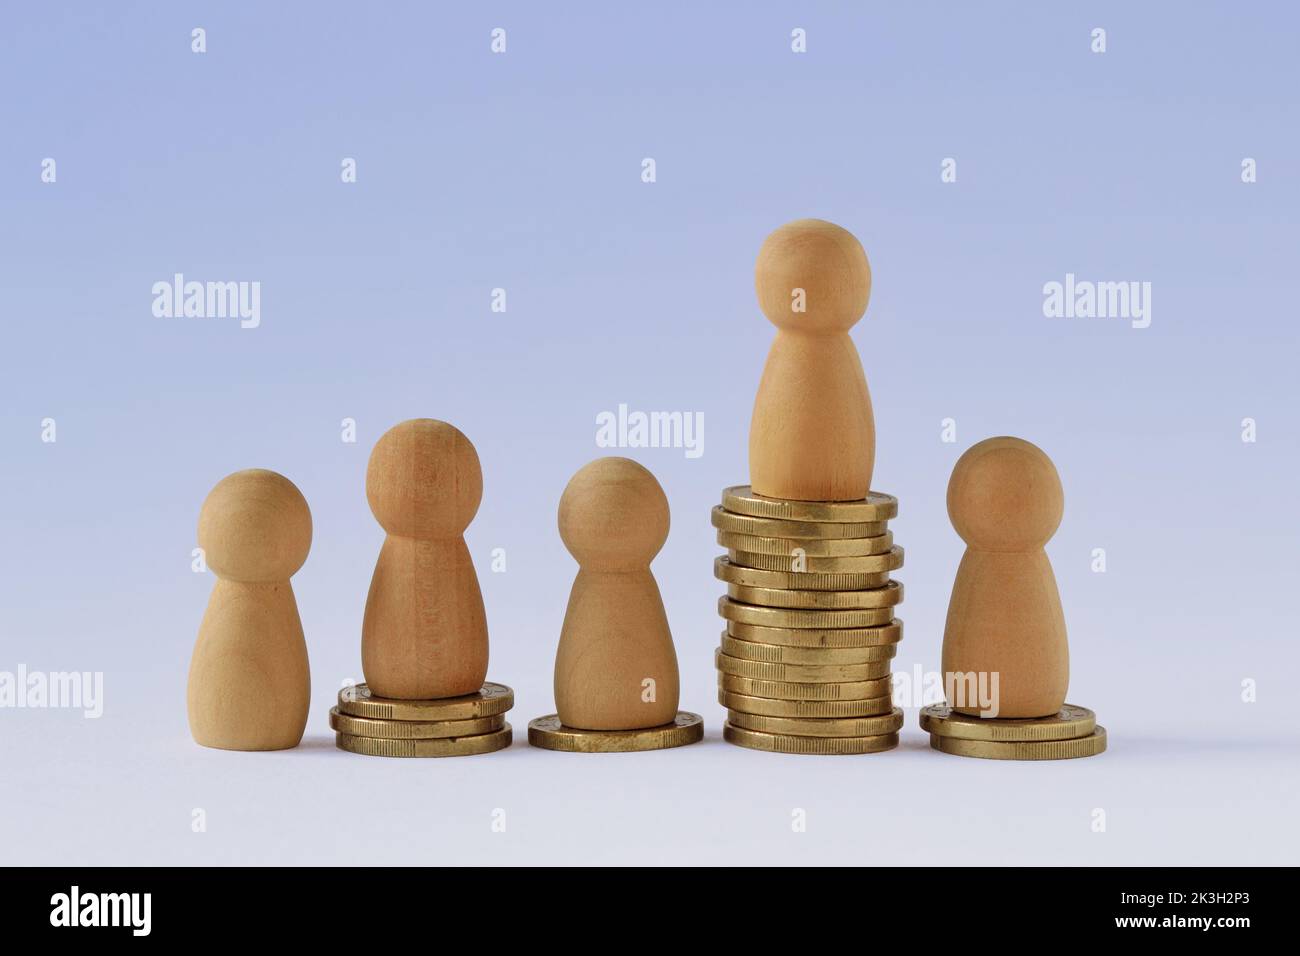 Pawns on stacks of coins - Concept of economic inequality Stock Photo